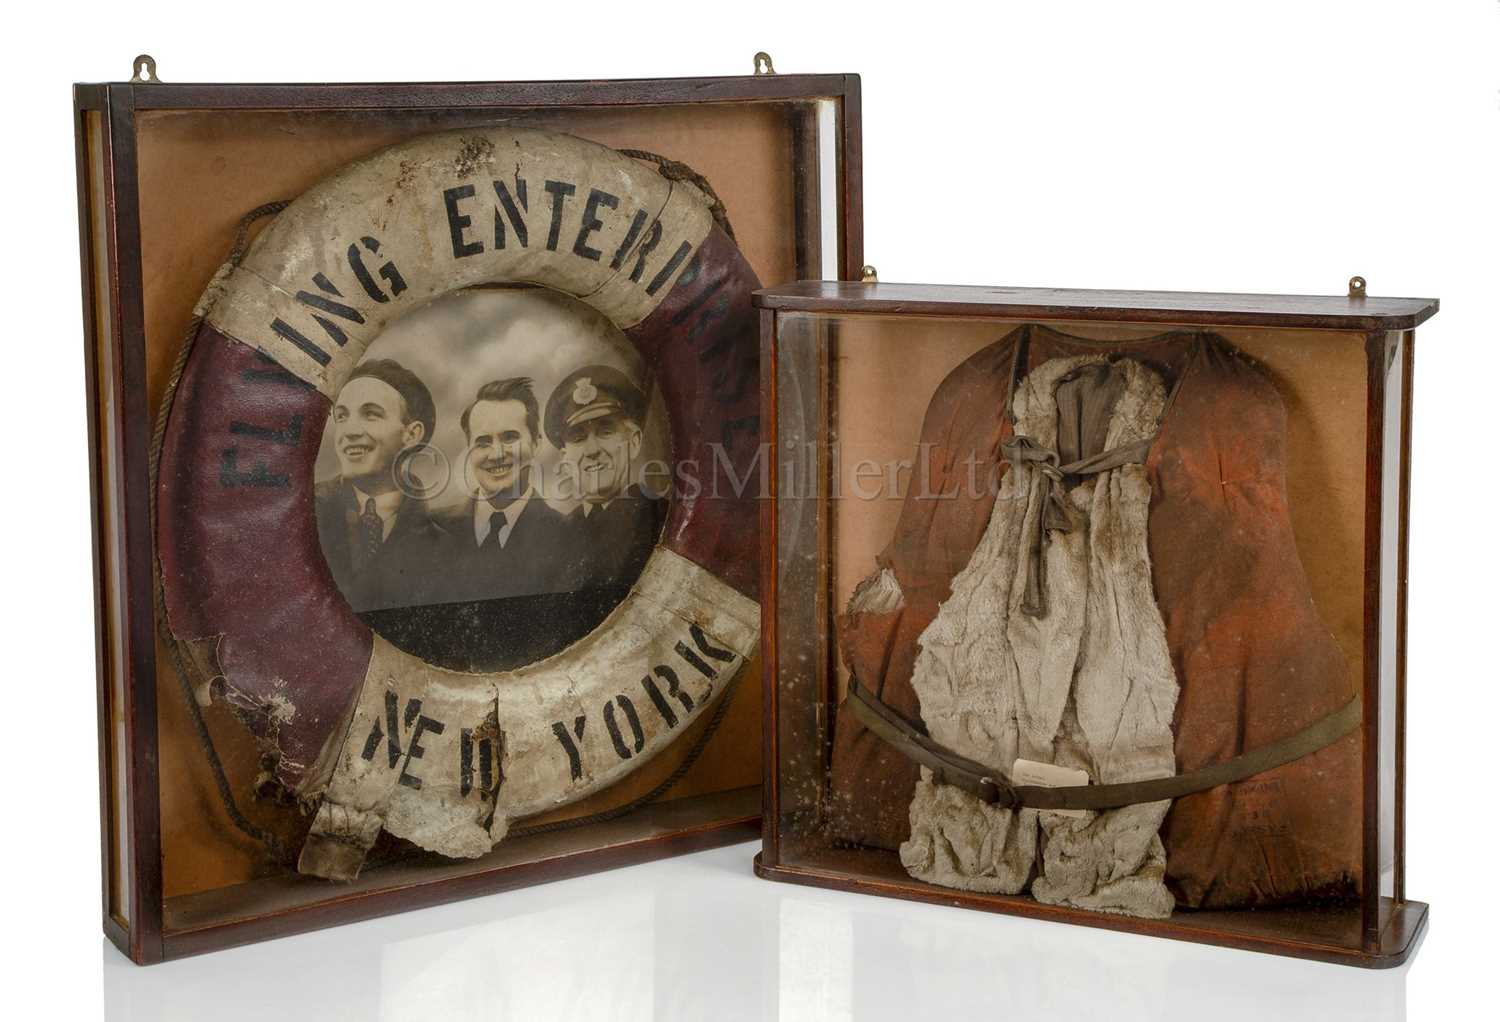 Lot 65 - RELICS OF THE S.S. 'FLYING ENTERPRISE': A LIFE PRESERVER AND A LIFEBUOY